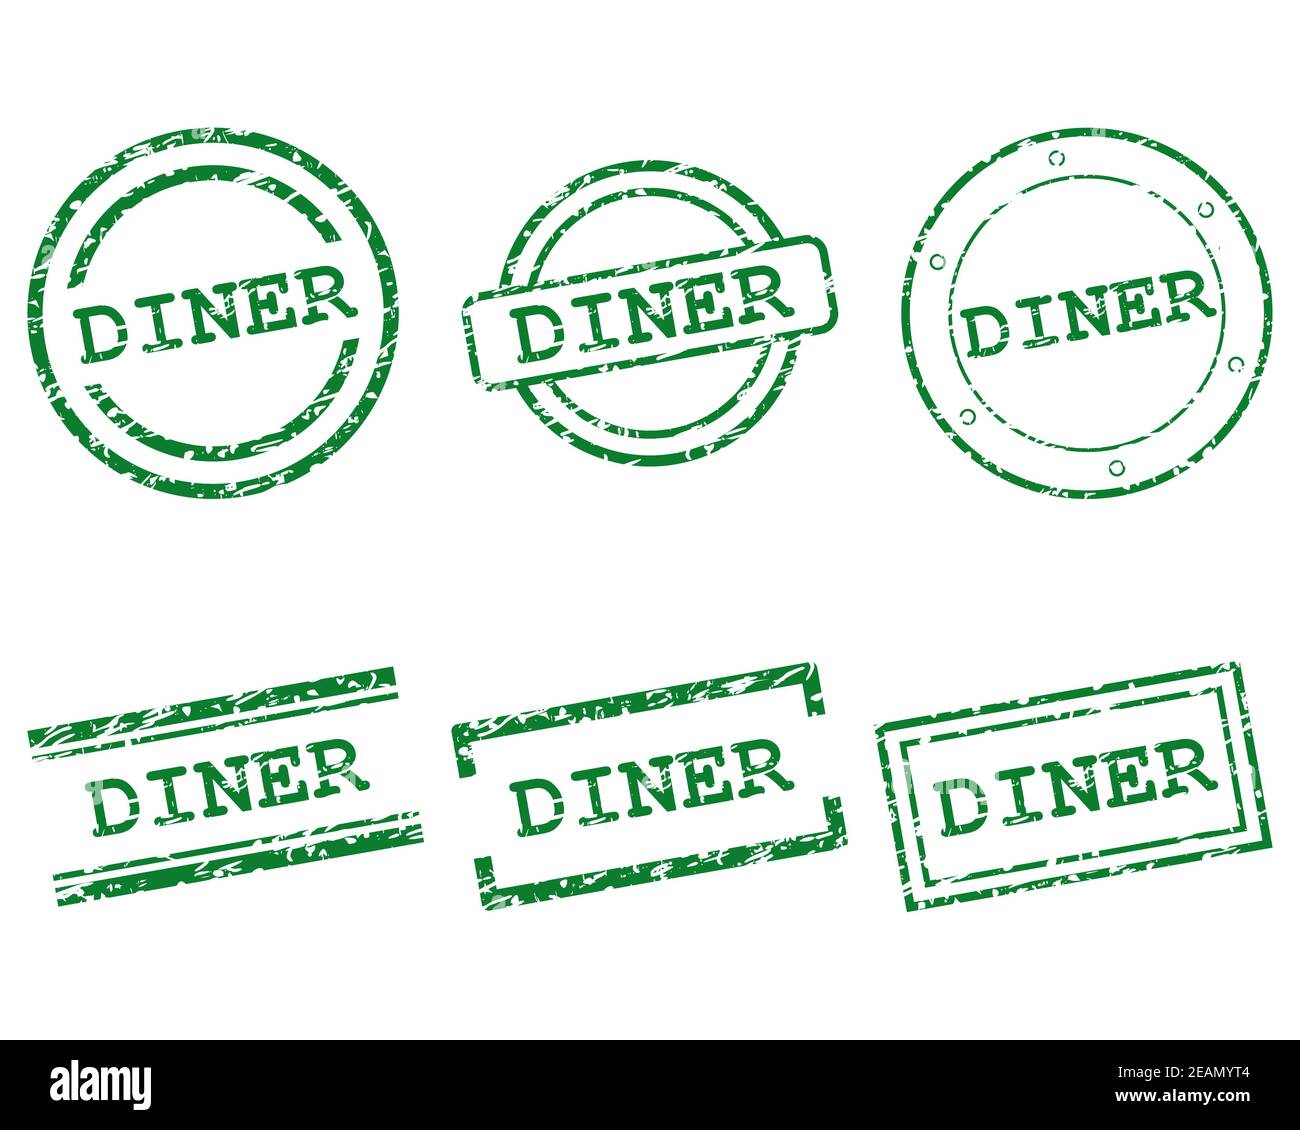 Diner stamps Stock Photo